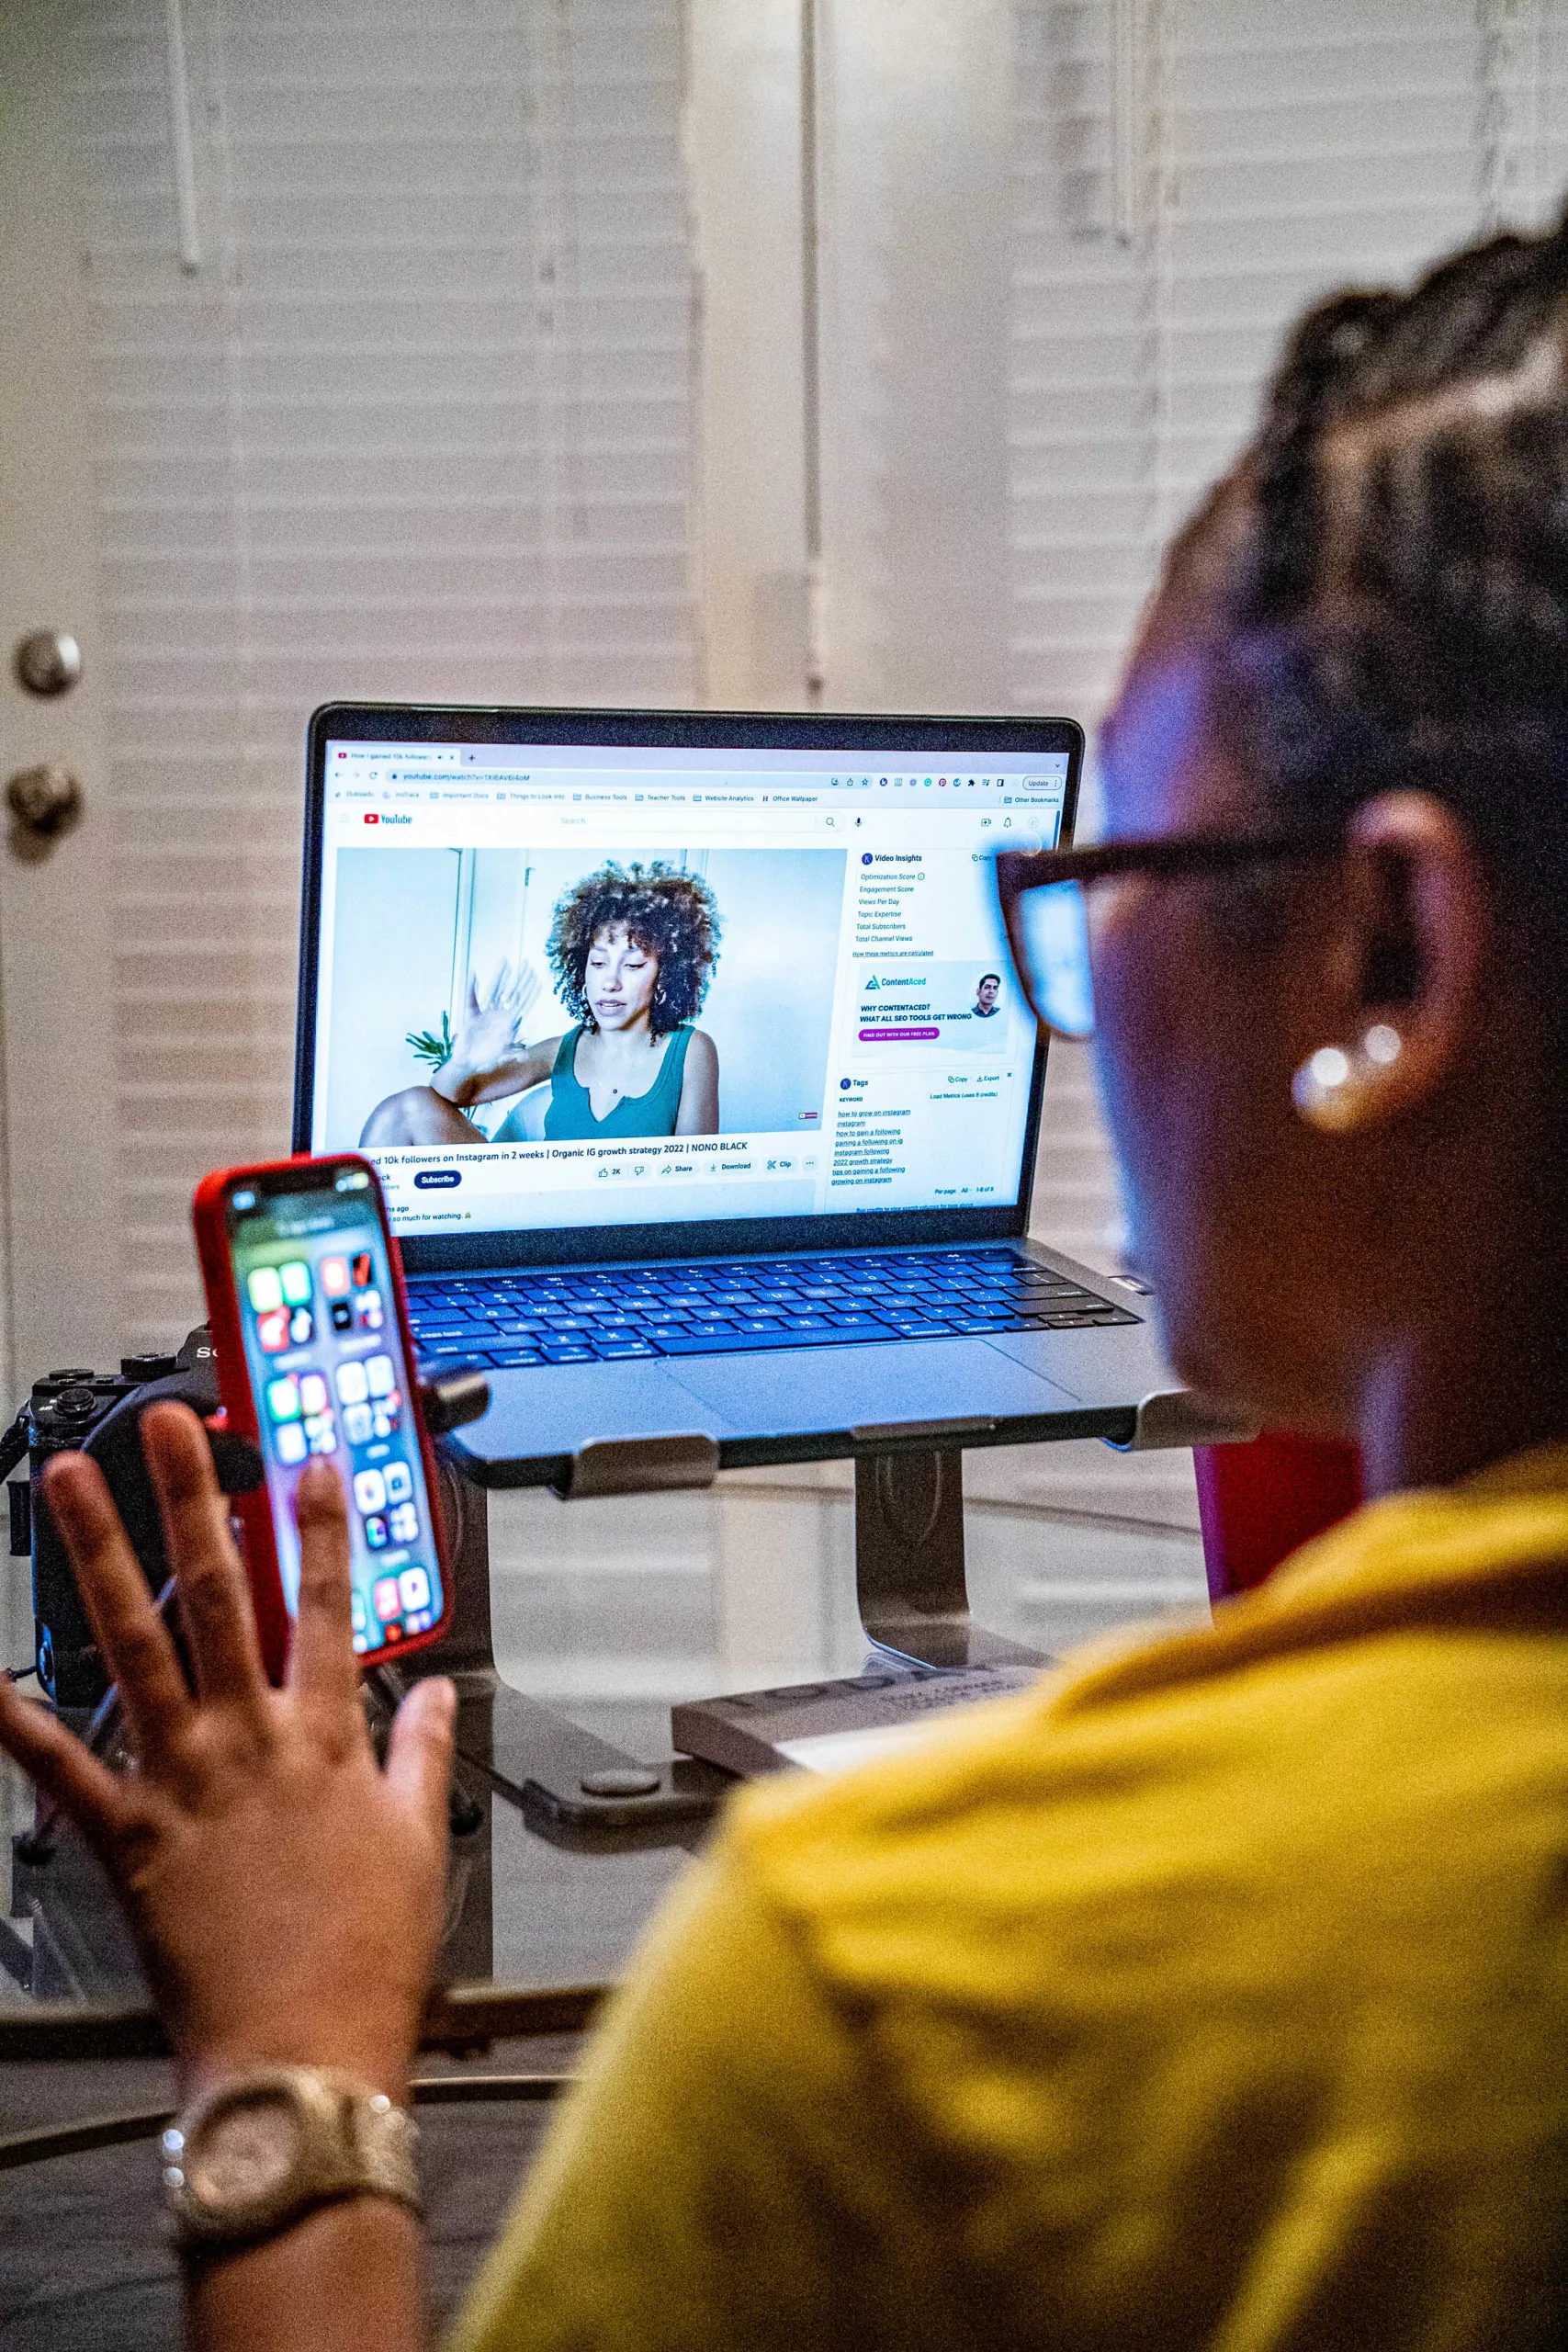 Black woman in yellow shirt using cellphone and laptop simultaneously.